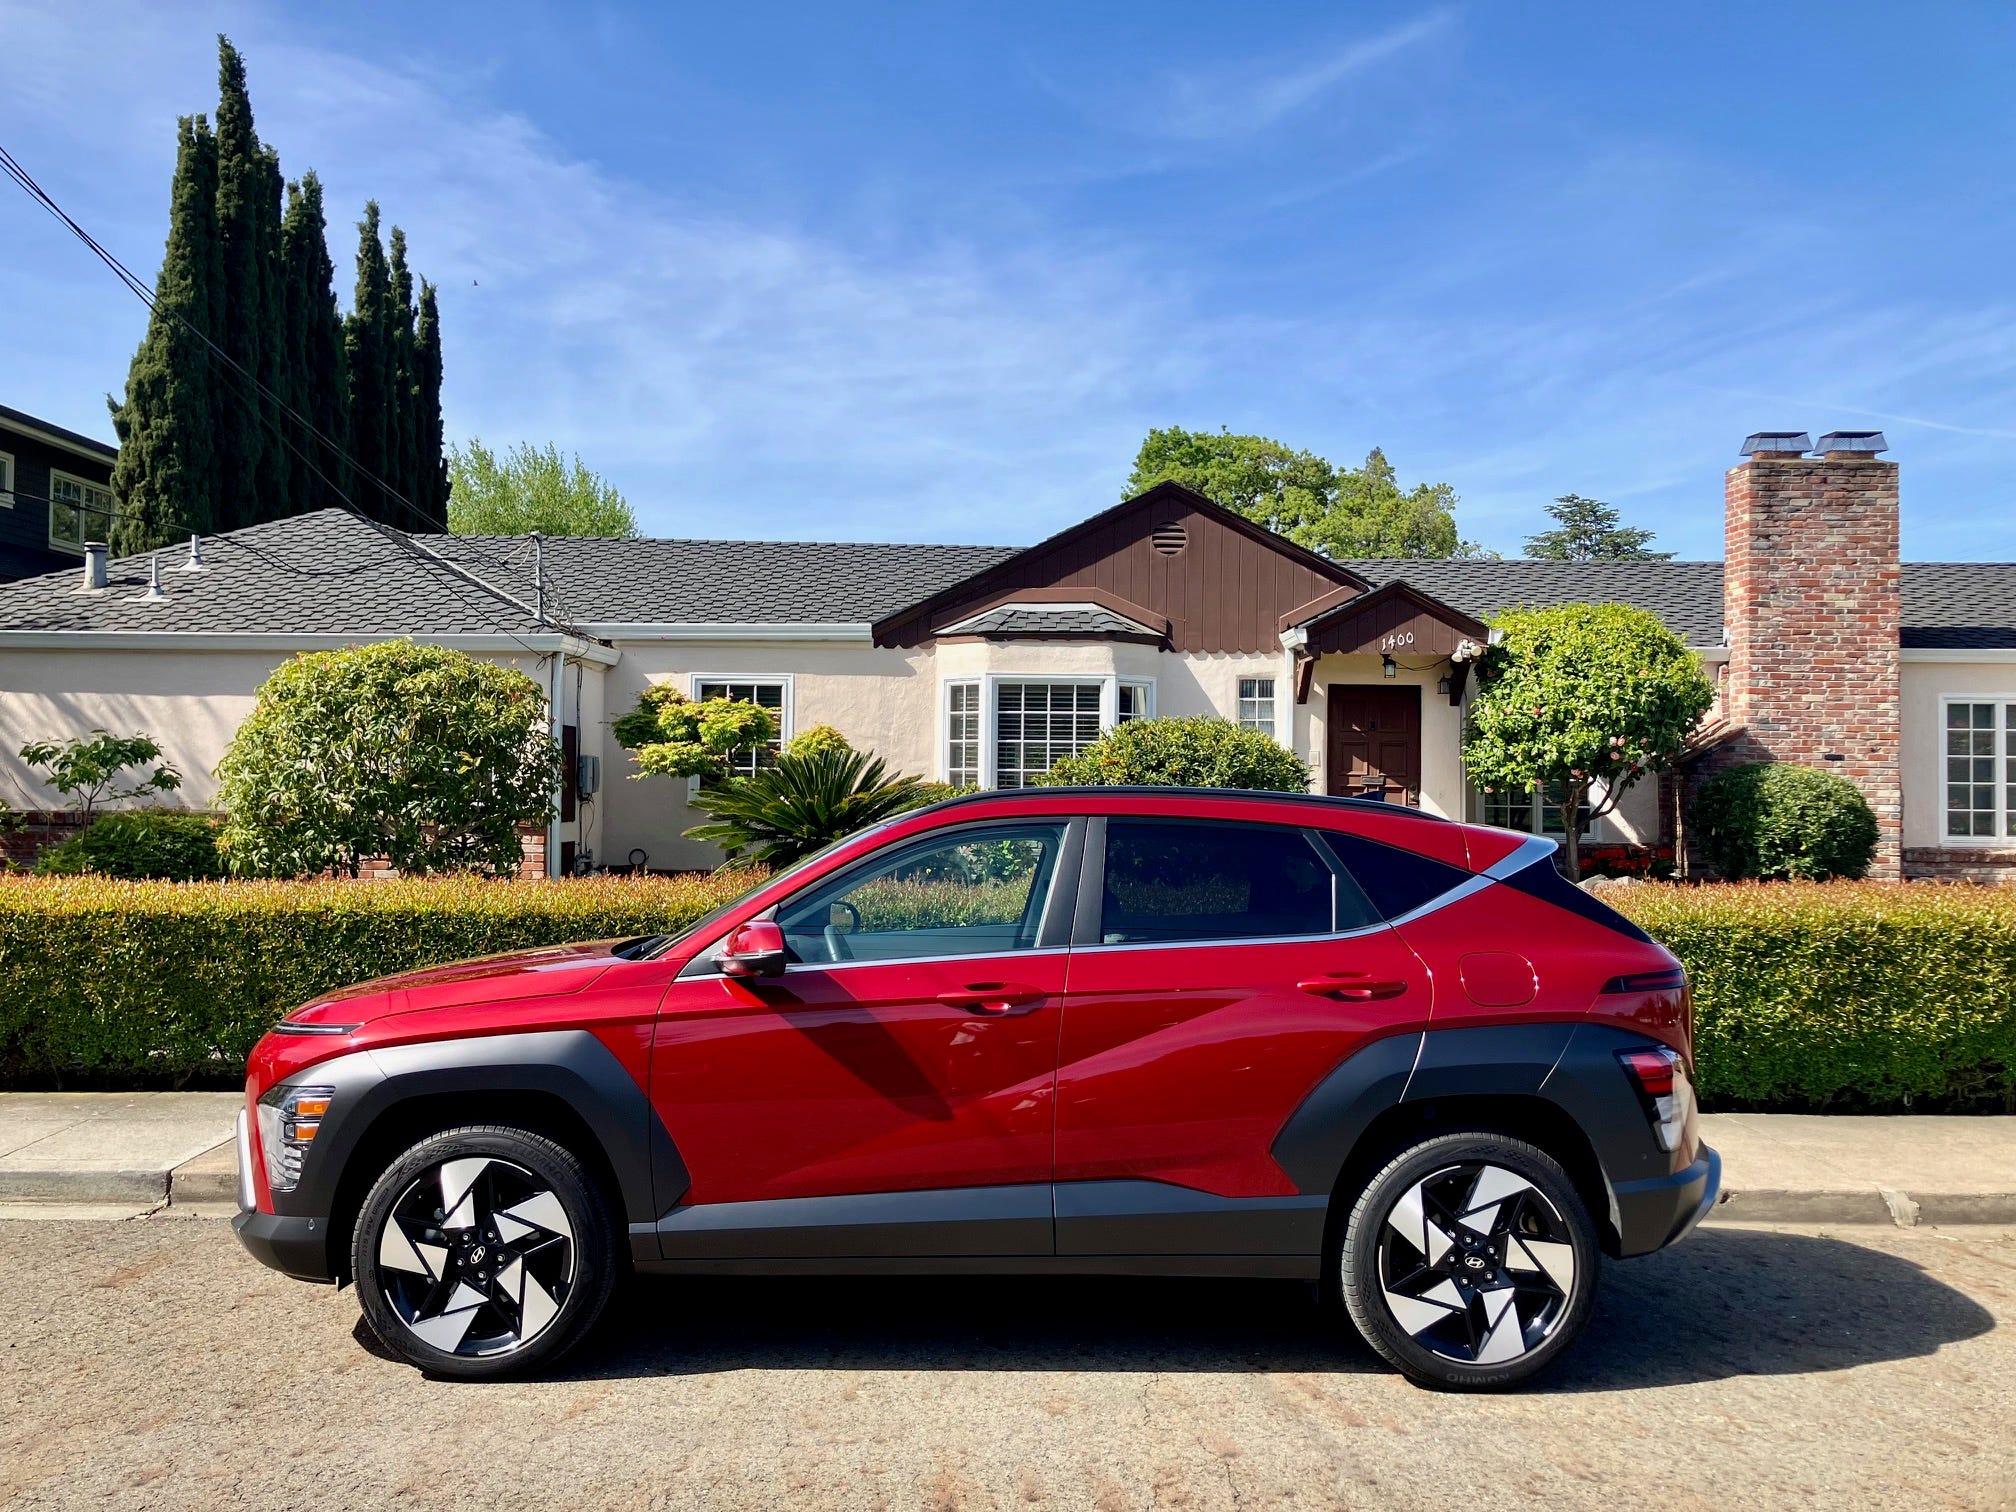 <ul class="summary-list"><li>A friend sought advice on a safe but not too-large car for his teenage sons.</li><li>I've also been thinking about what car would be suitable for my college-bound daughter.</li><li>I drove a Hyundai Kona from Silicon Valley to Santa Barbara to find out if this car fits the bill.</li></ul><p>A close friend of mine recently called me for advice. He wanted to know what vehicle he should get for his teenage sons to drive.</p><p>The main criteria: It's got to be safe for these young drivers. But it also can't be too heavy and big, so if an accident happens, god forbid, they don't do too much damage to those around them.</p><p>I've been thinking about this a lot lately, too. My youngest daughter is about to leave for college. She occasionally drives our ancient Toyota. What would I want her driving as an adult heading out into the world?</p><p>On a recent trip from Silicon Valley to visit UC Santa Barbara with my wife and daughter, I got to try out a vehicle that fits the bill: The 2024 <a href="https://www.hyundaiusa.com/us/en/vehicles/kona">Hyundai Kona</a>.</p><p>Here are the highlights of the trip and a rundown of what we loved, liked, and disliked about this vehicle.</p><div class="read-original">Read the original article on <a href="https://www.businessinsider.com/hyundai-kona-test-drive-review-2024-4">Business Insider</a></div>